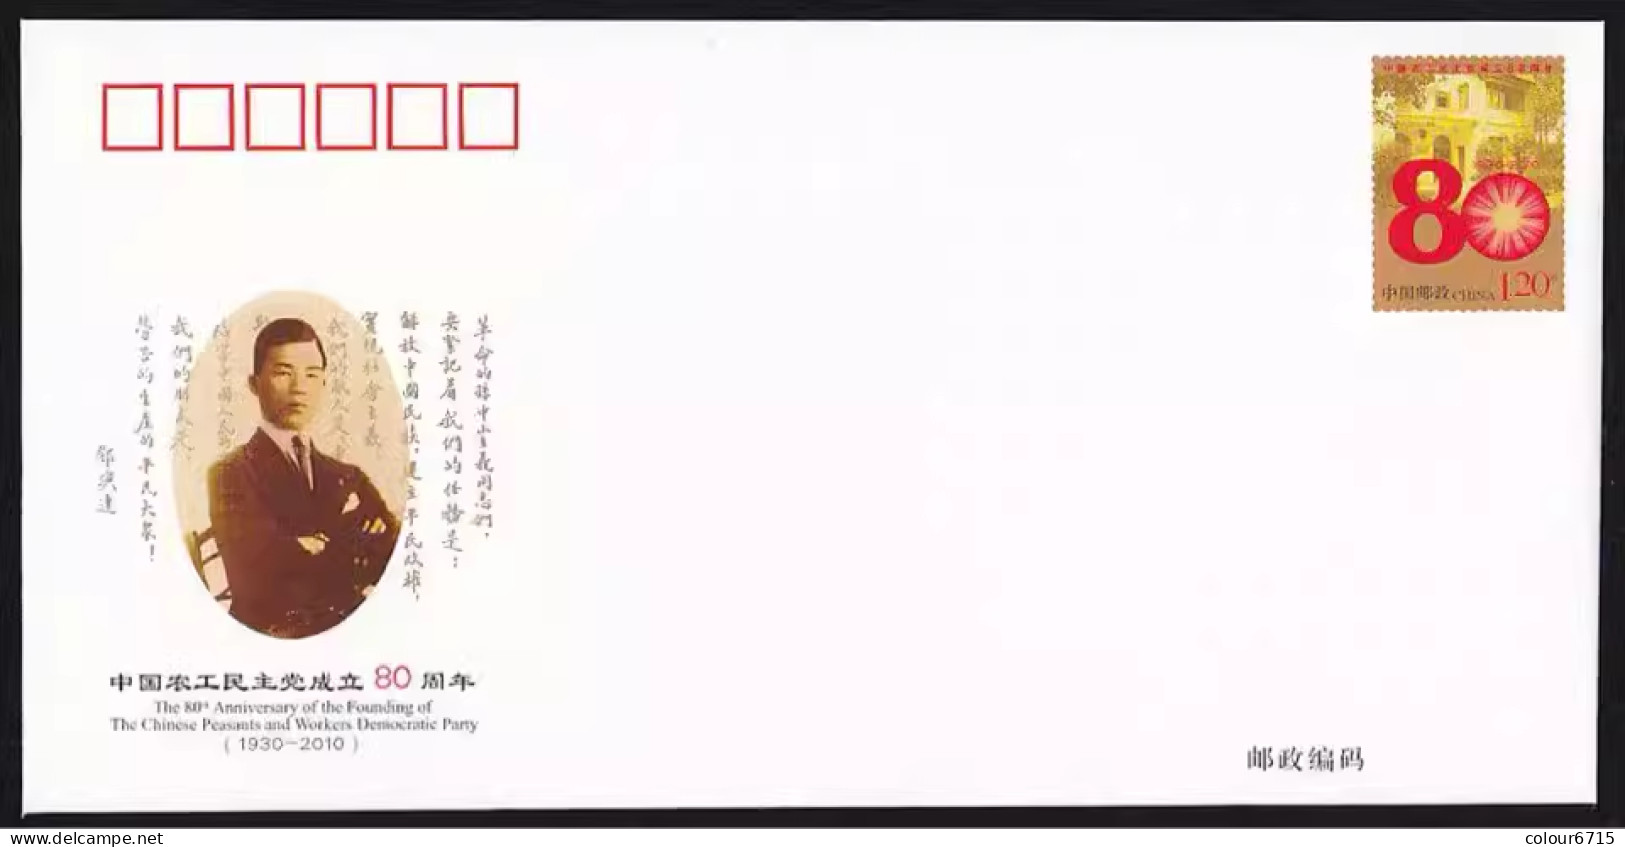 China Postal Cover 2010/JF97 The The 80th Anniversary Of Chinese Peasants And Workers Democratic Party 1v MNH - Enveloppes